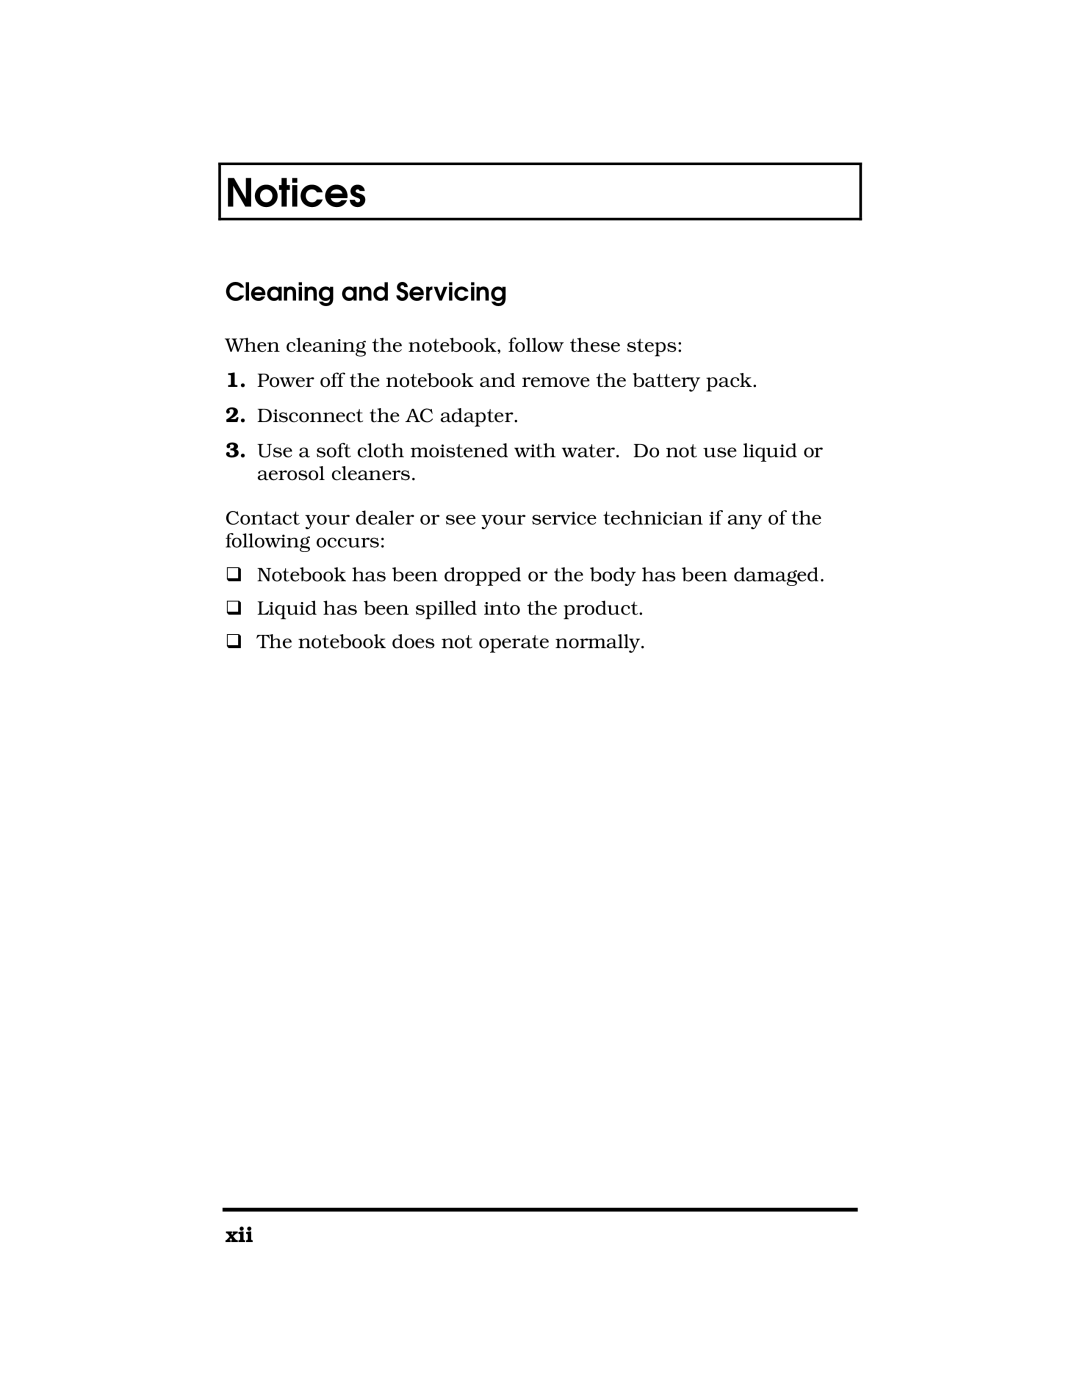 Acer 390 Series manual Cleaning and Servicing, Notices 